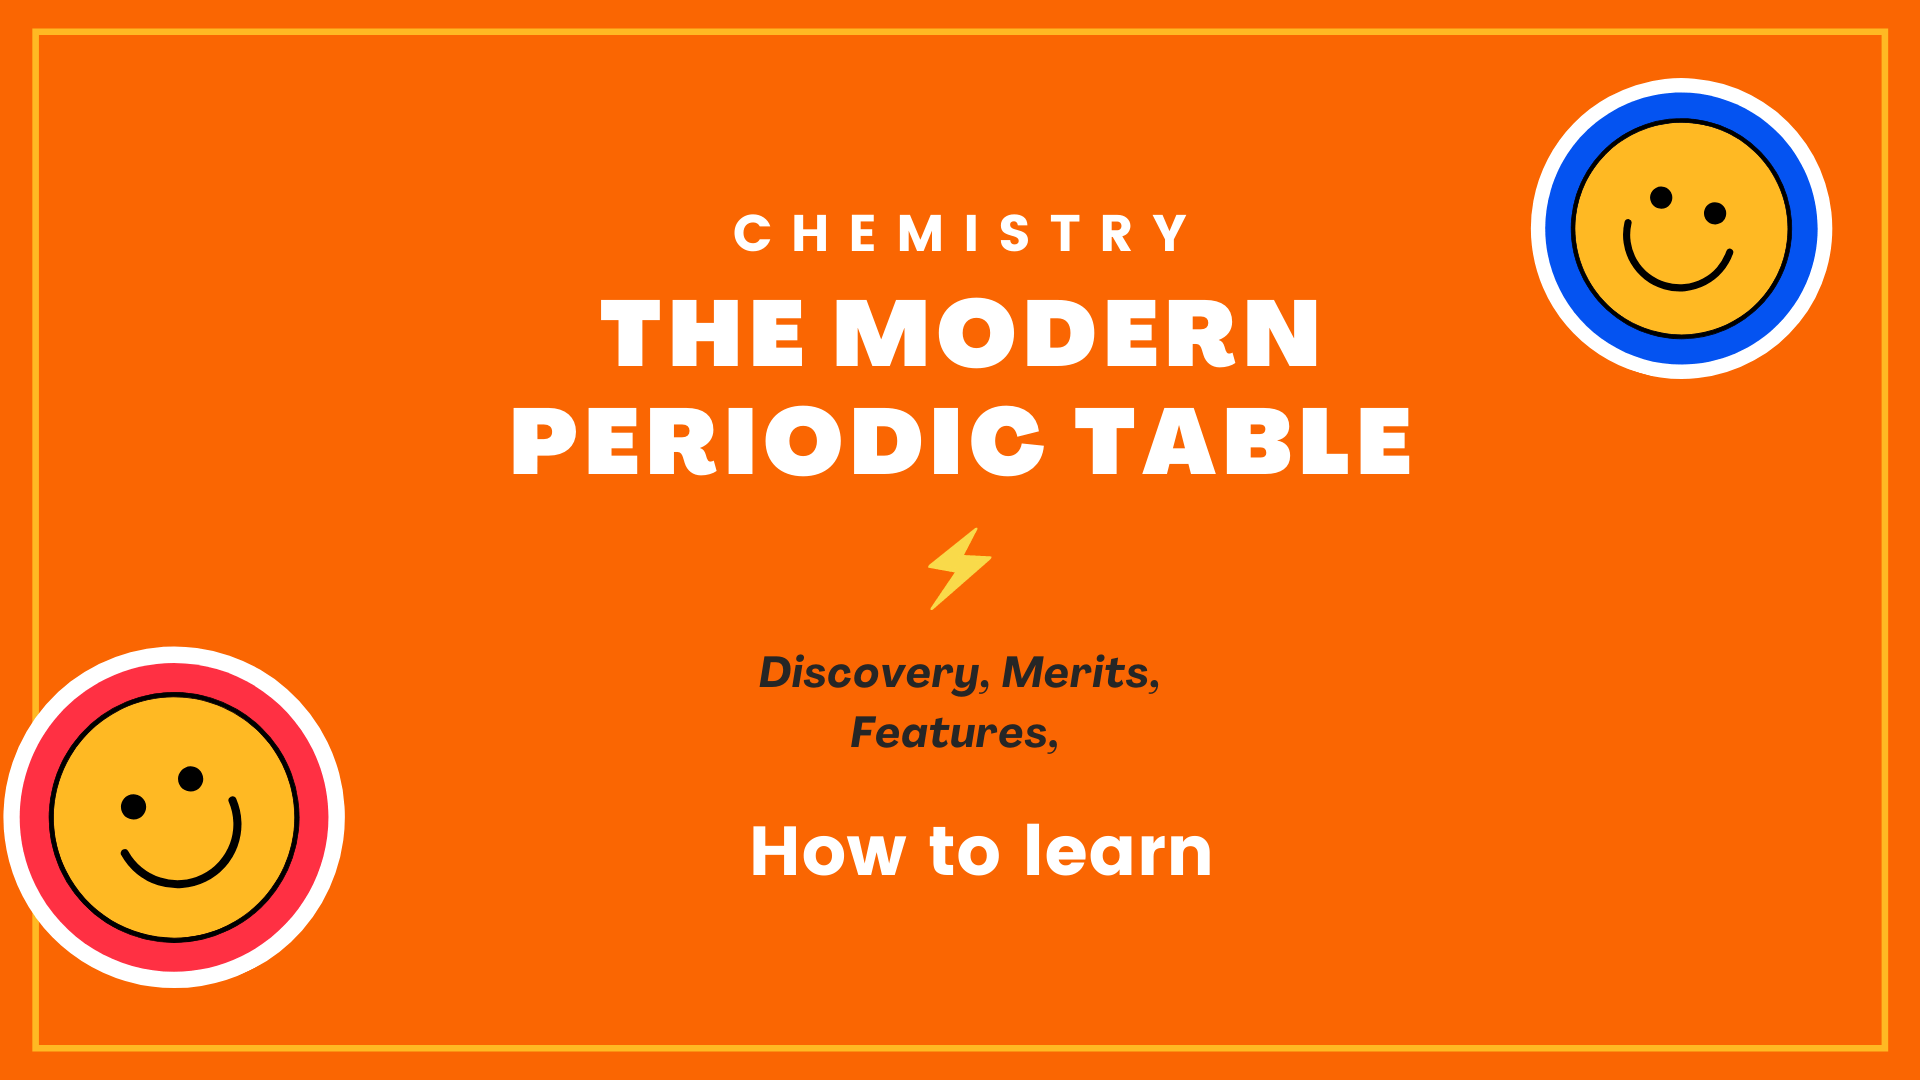 How To Learn Modern Periodic Table Elements Features Images Discovery Its Merits And Long Form - What Are The Main Features Of Modern Periodic Table